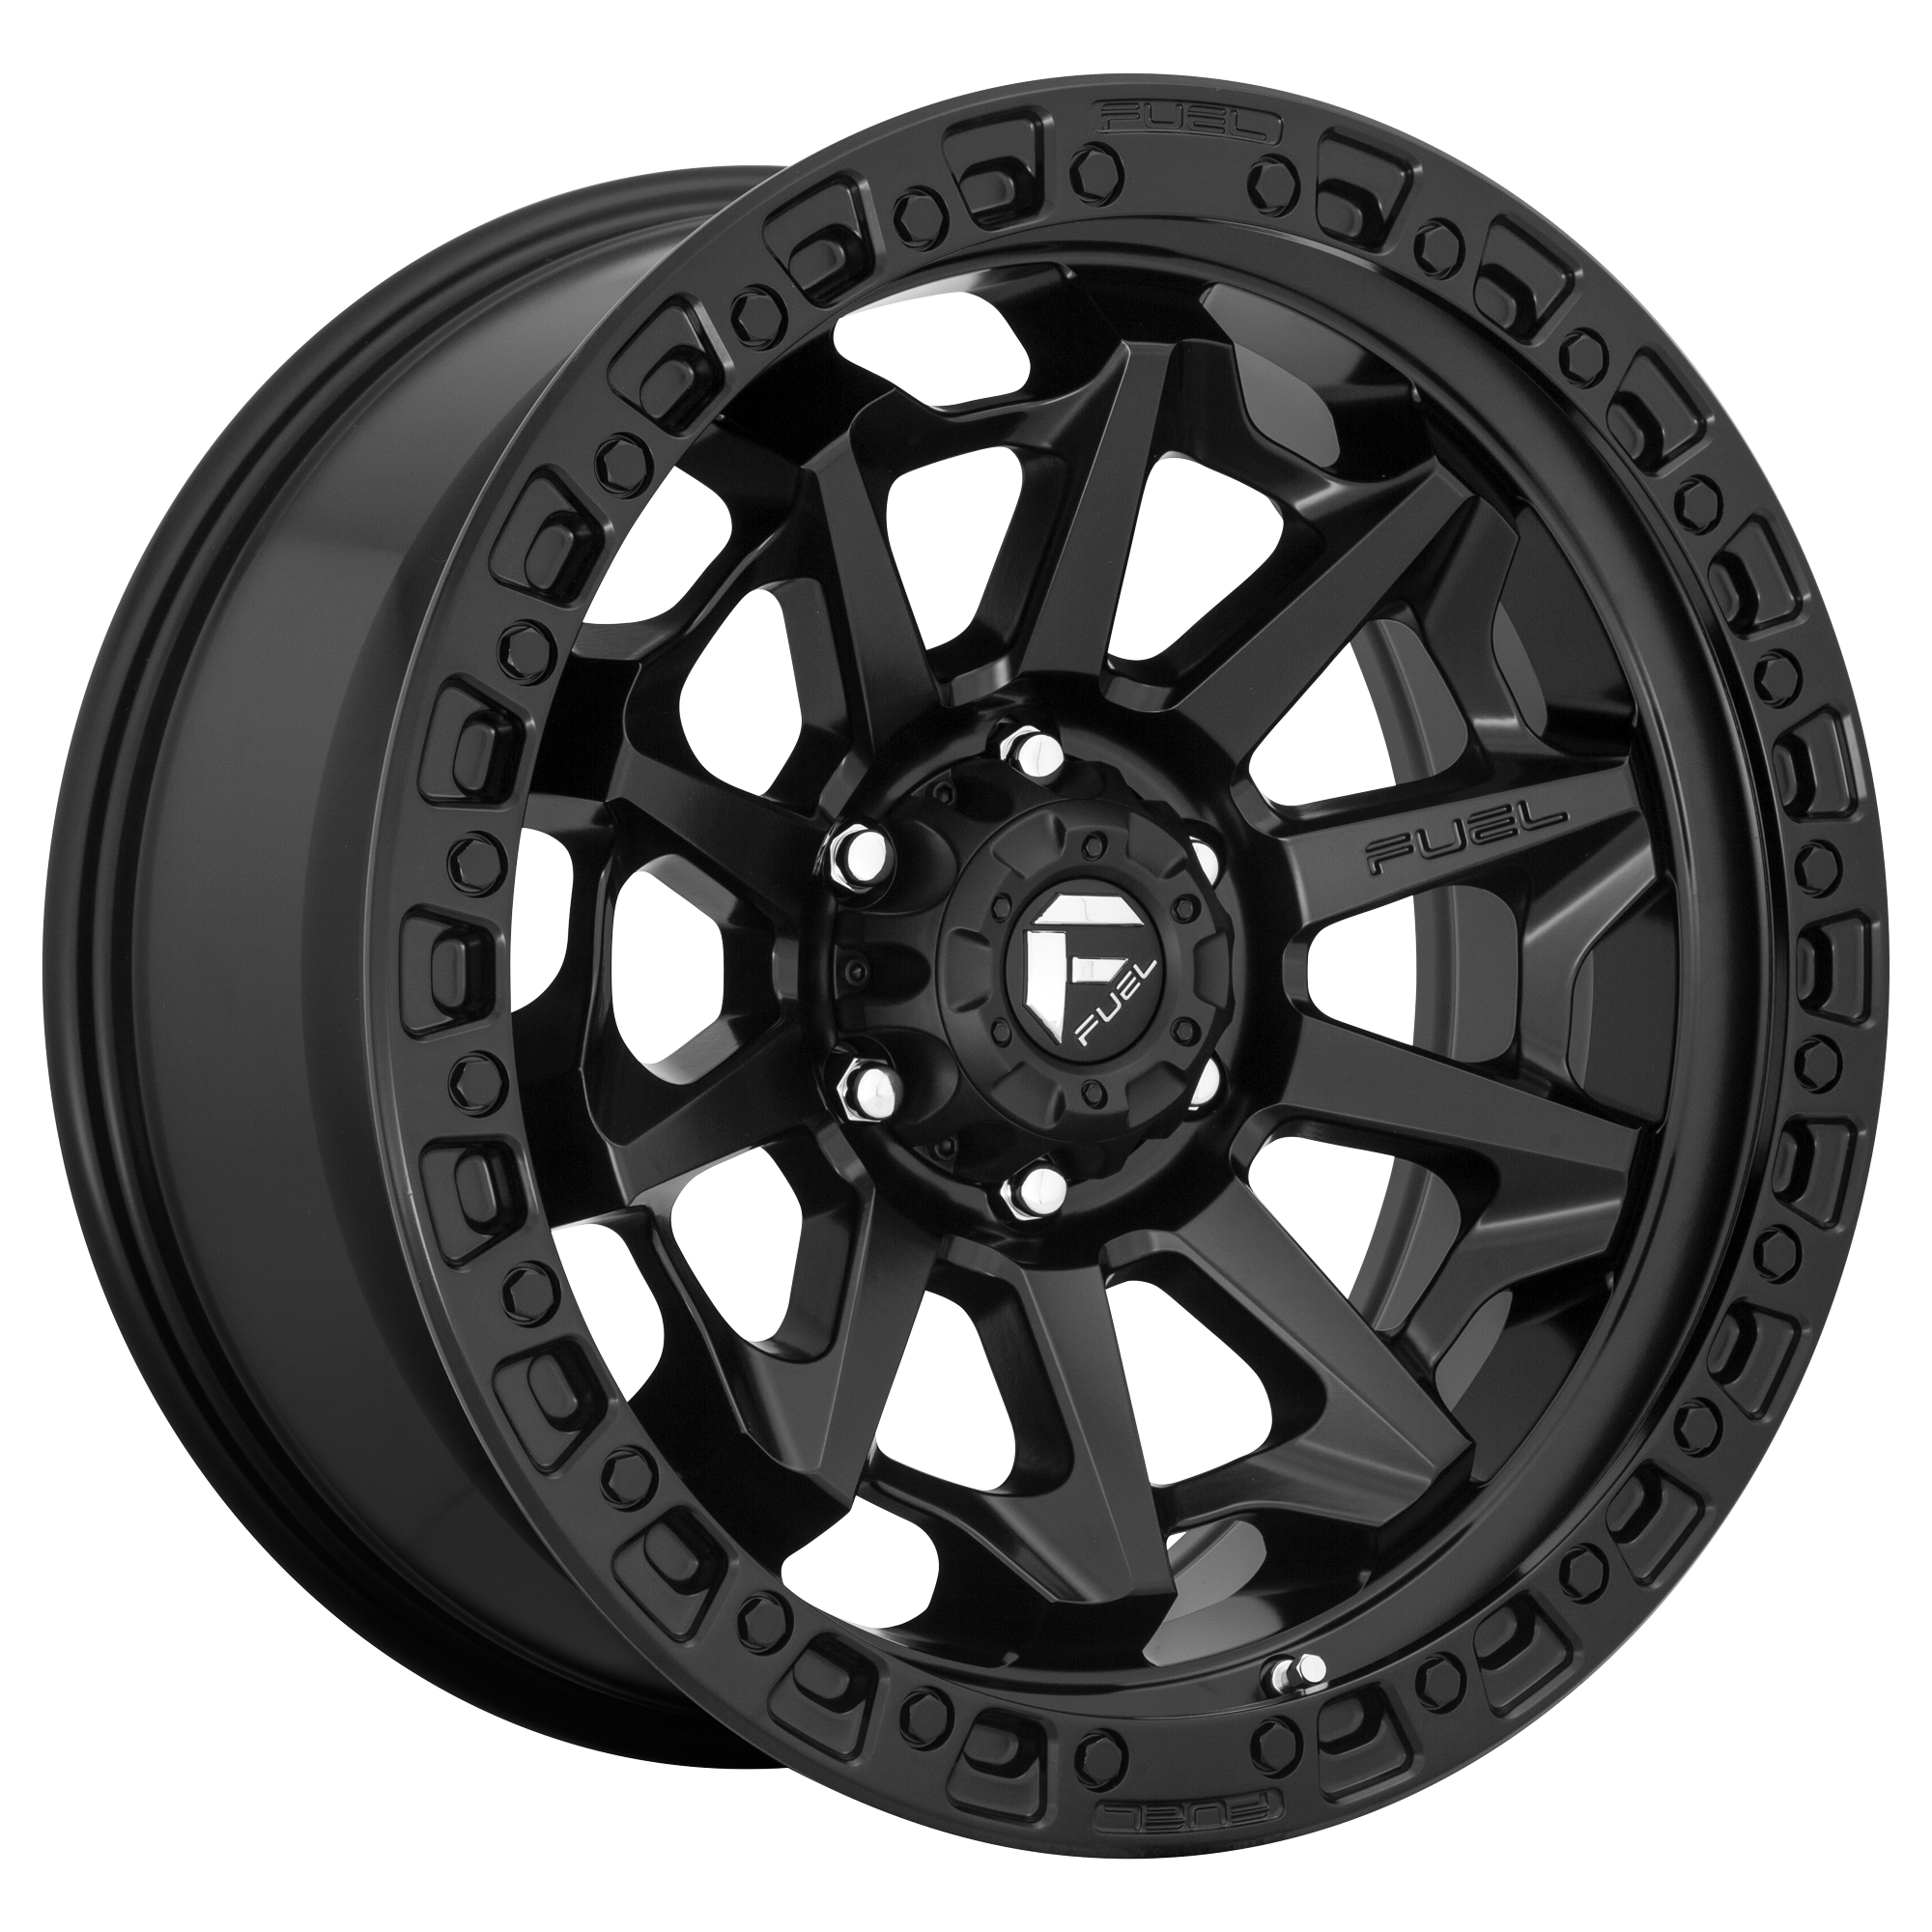 COVERT 20x9 6x139.70 MATTE BLACK (20 mm) - Tires and Engine Performance